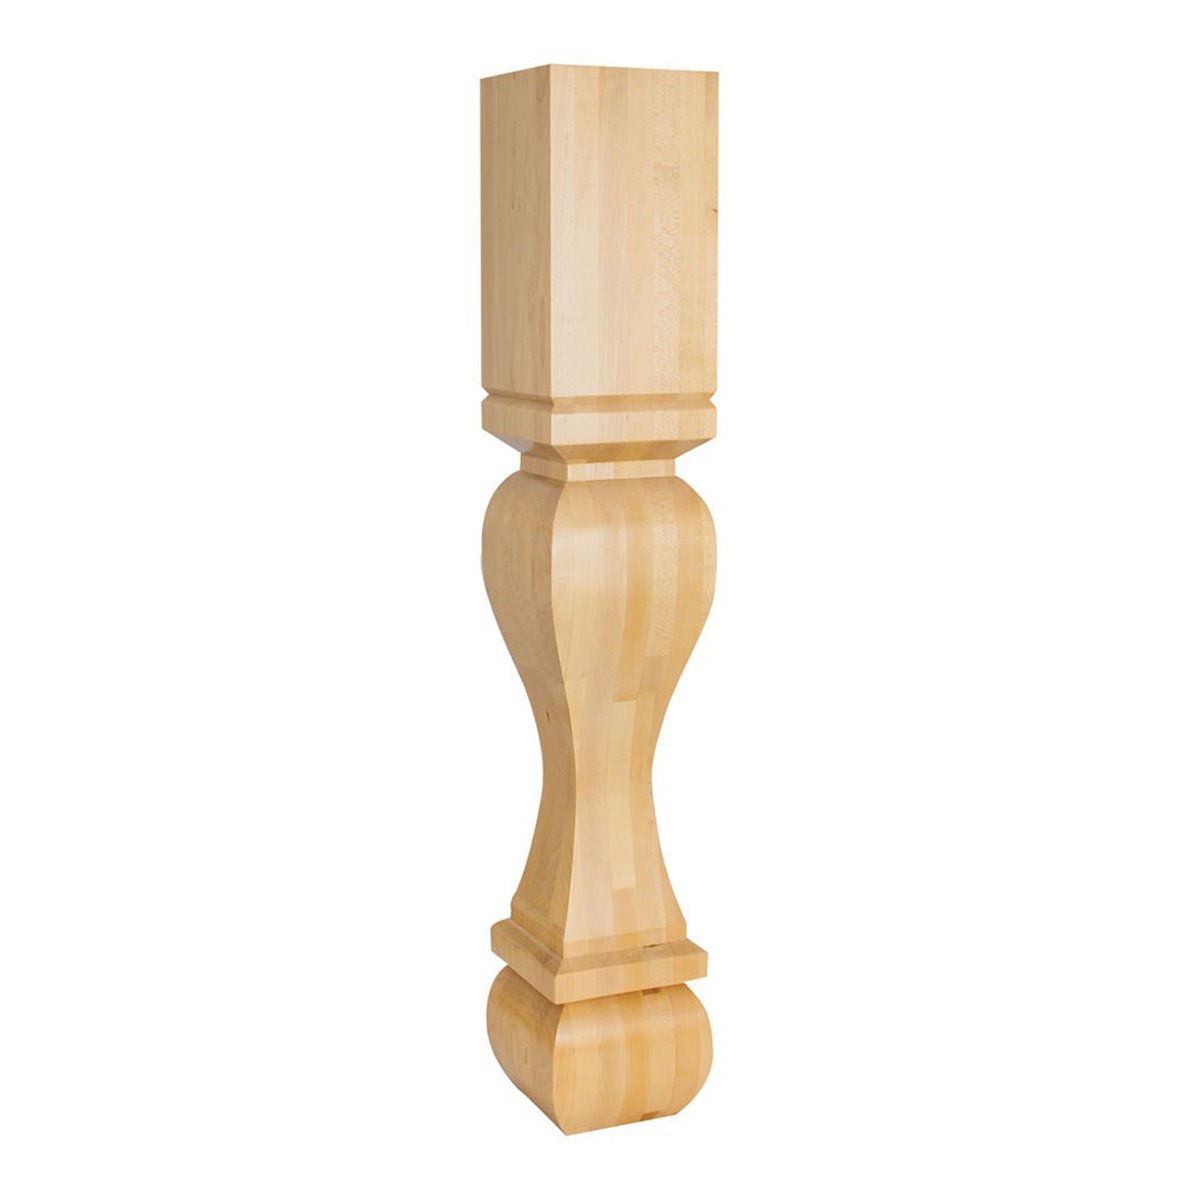 Hardware Resources 6" x 6" x 35-1/2" Square Alder Post / Table Leg with Foot-DirectSinks